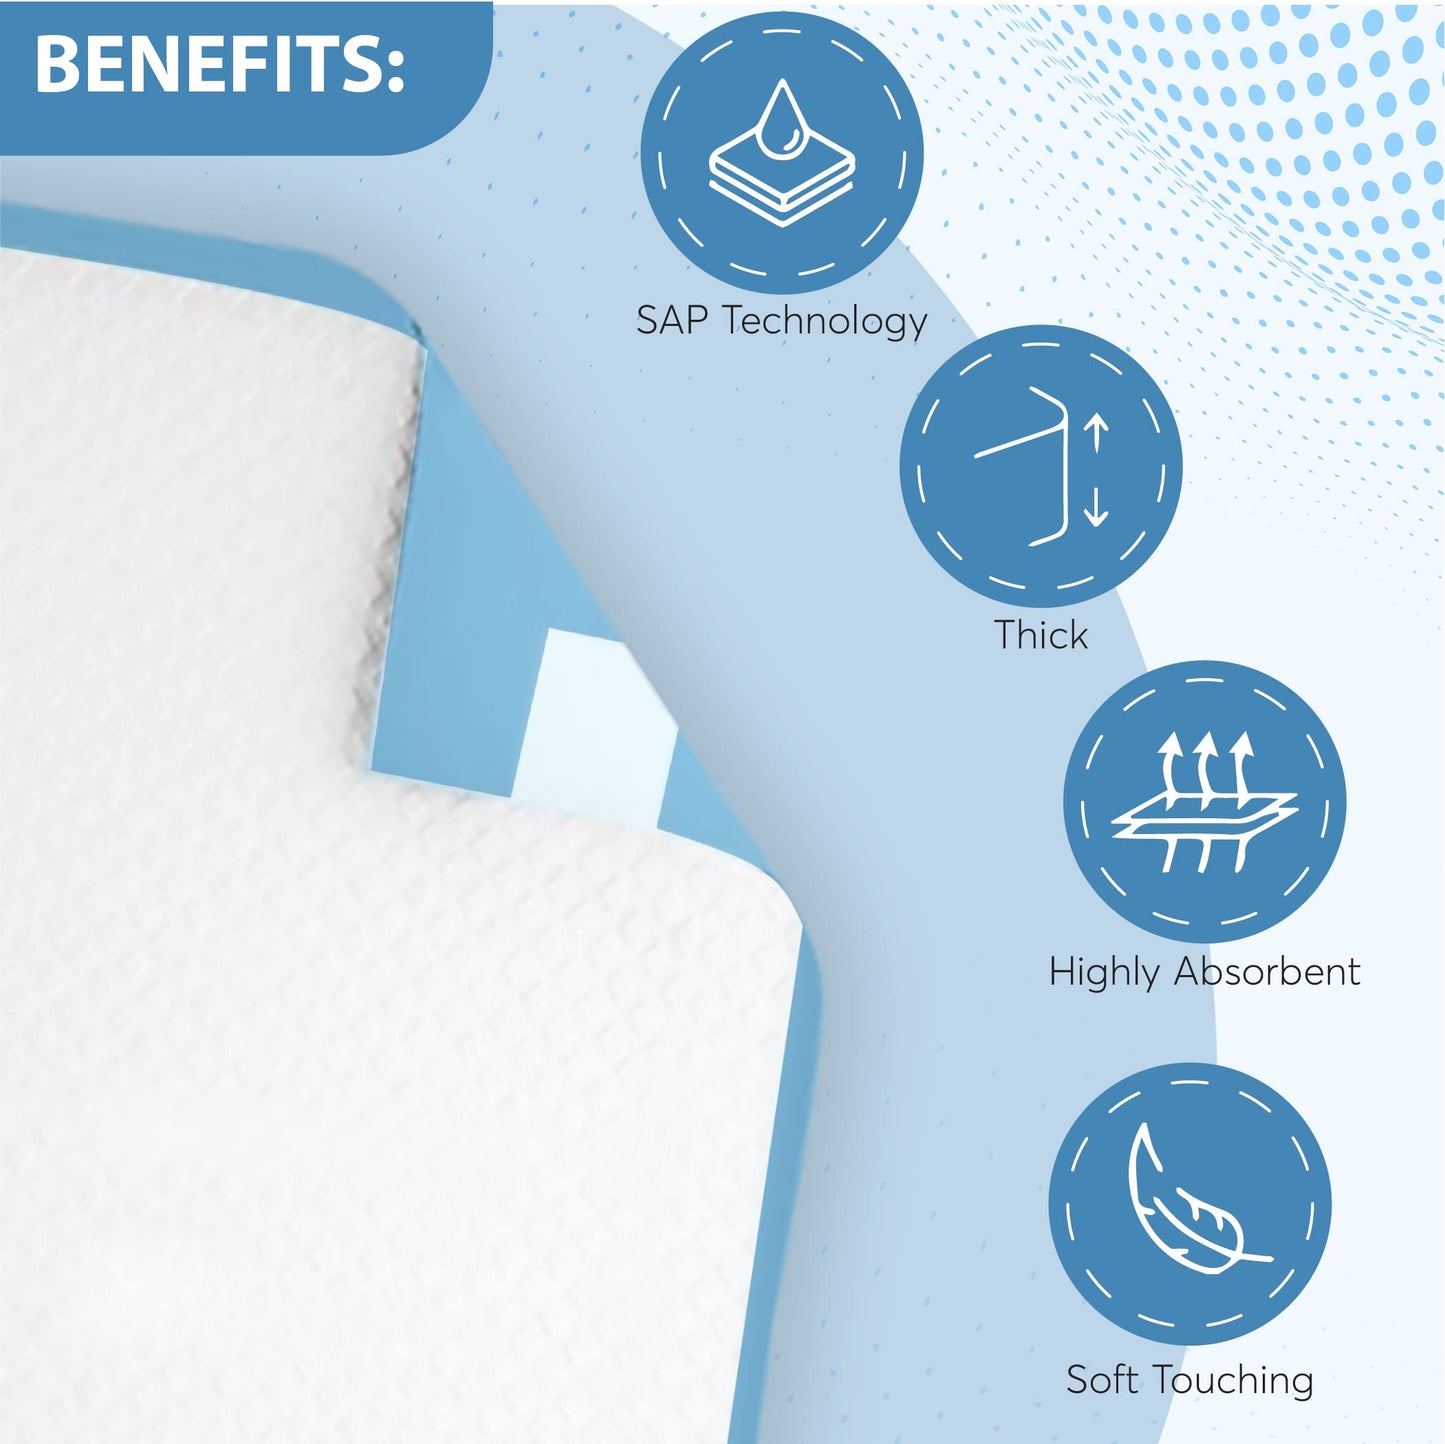 30 x Incontinence Bed Pads | Incontinence Bed Sheets | Disposable Bed Mats for Incontinence | Bed Protectors Kids & Adults | Maternity Bed Mats | Size 60×60cm (1 Pack of 30)